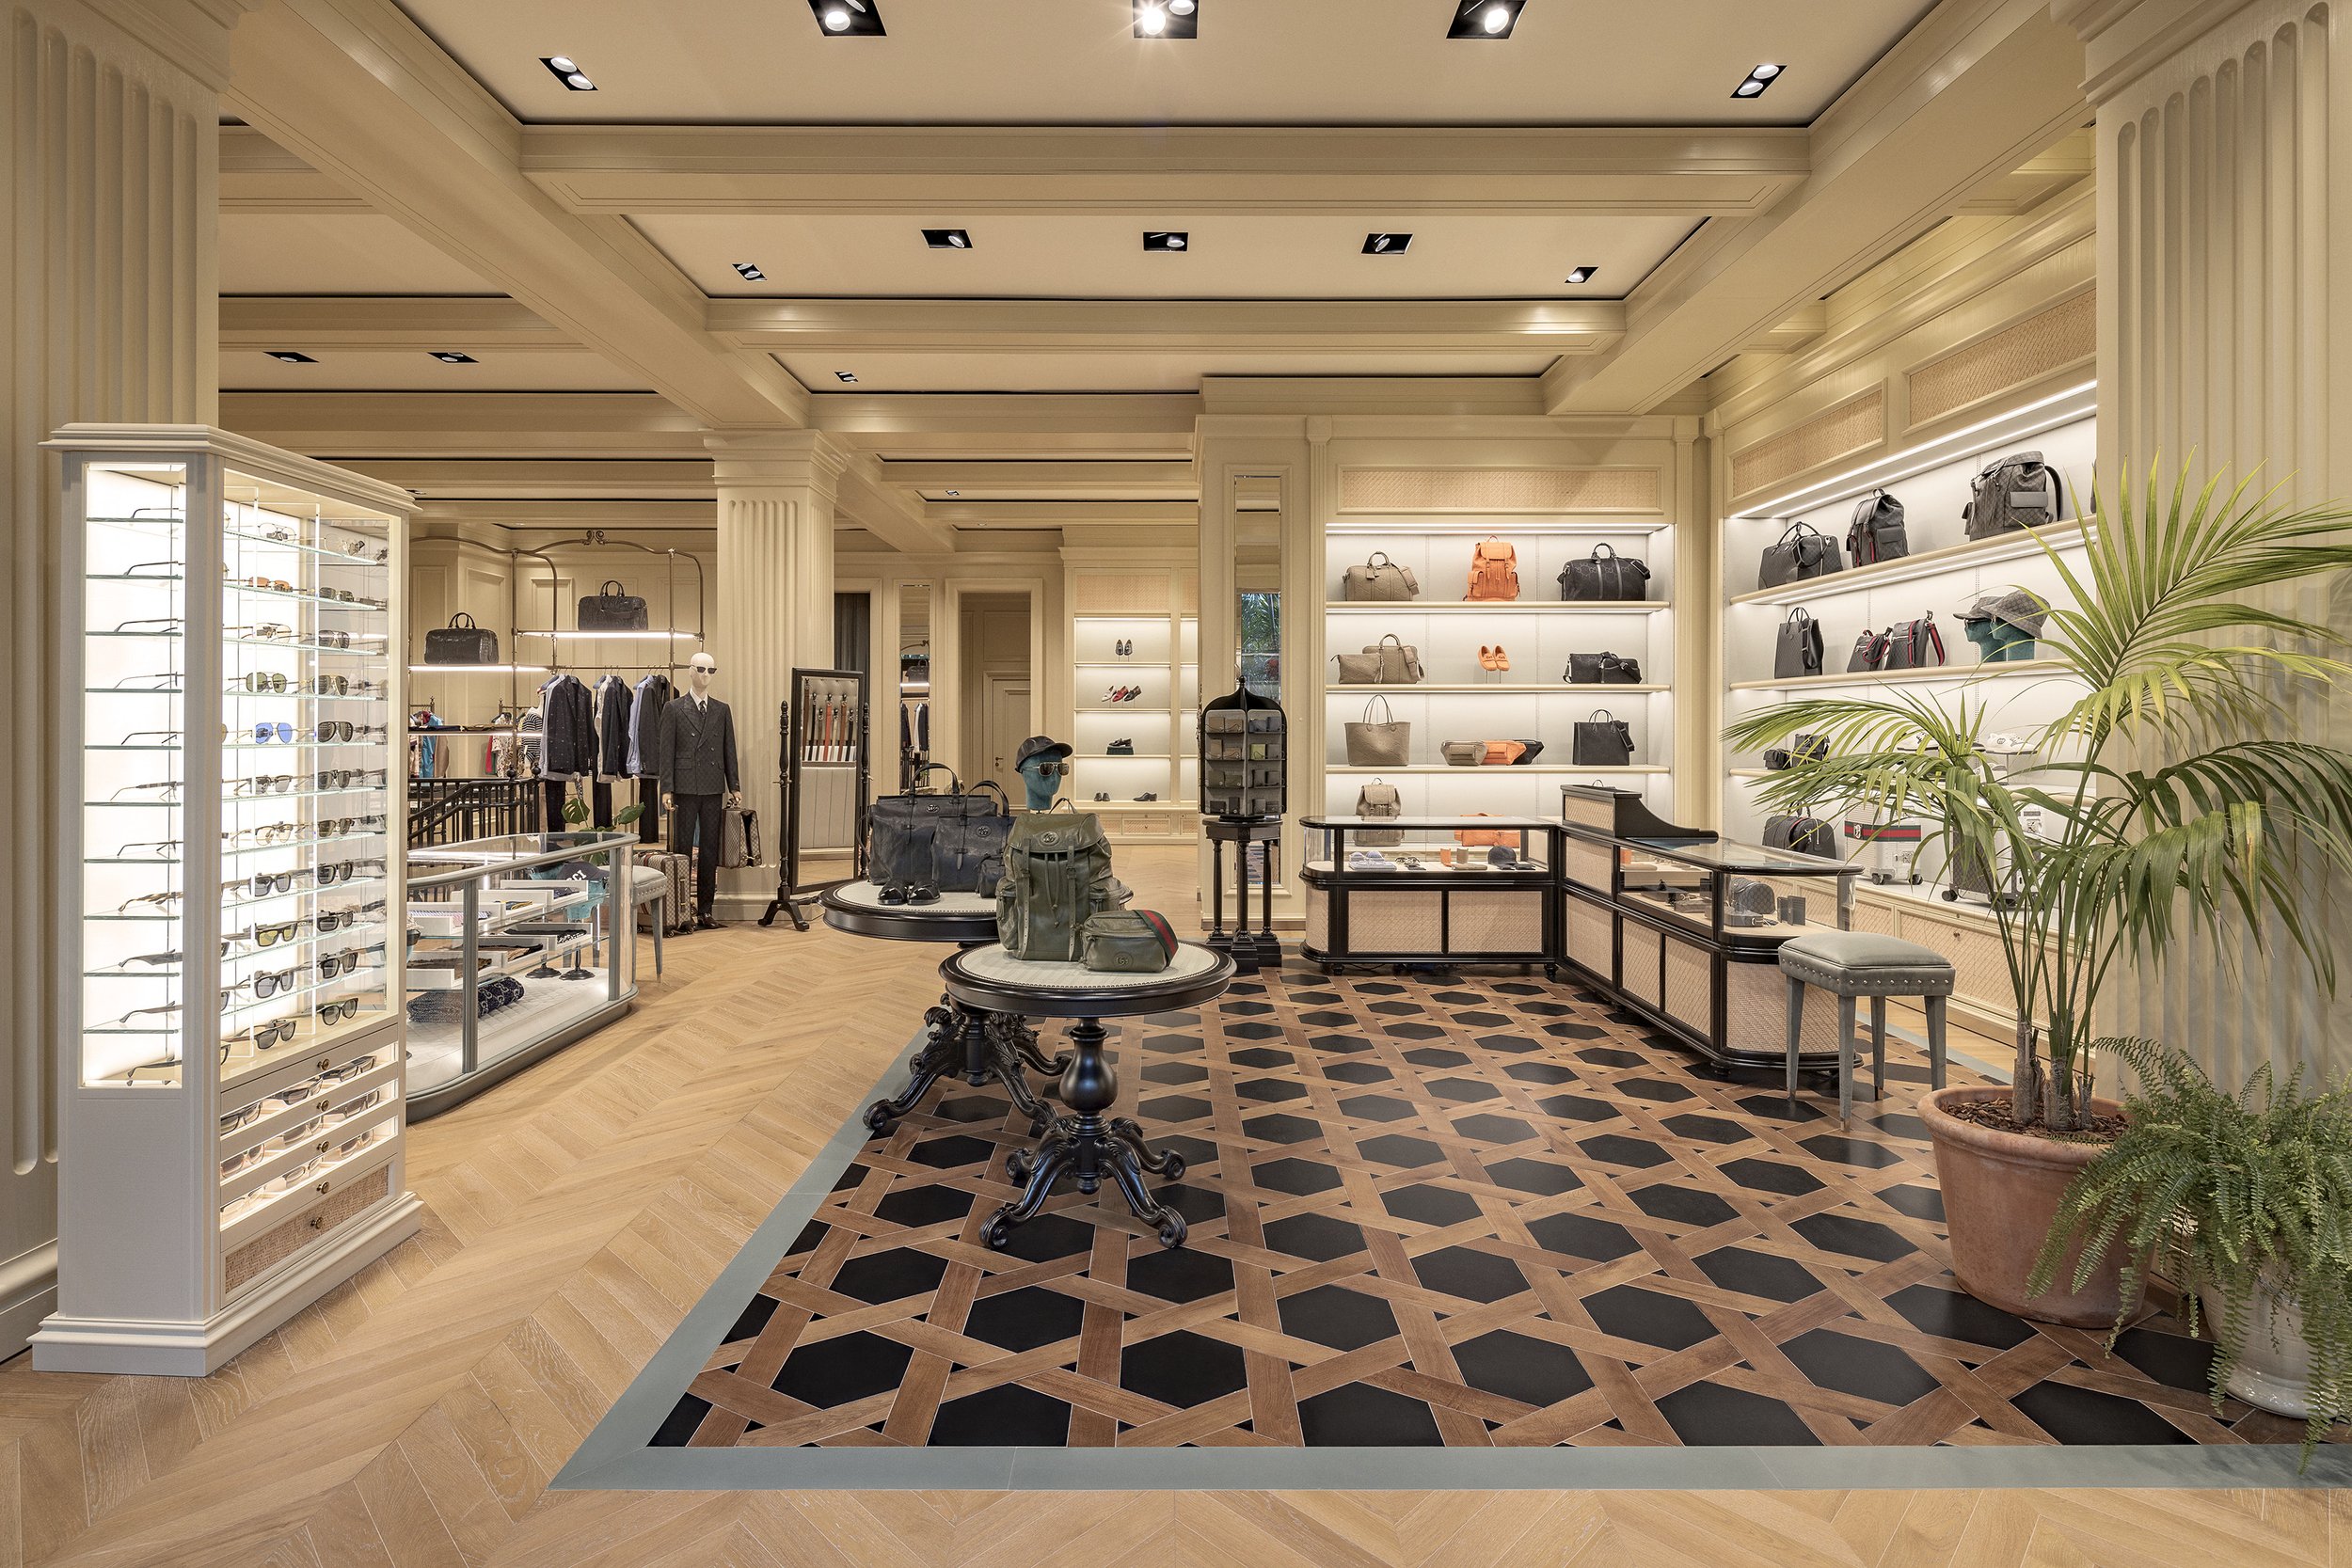 Gucci Opens Newly Expanded Two-Story Lavish Boutique At Bal